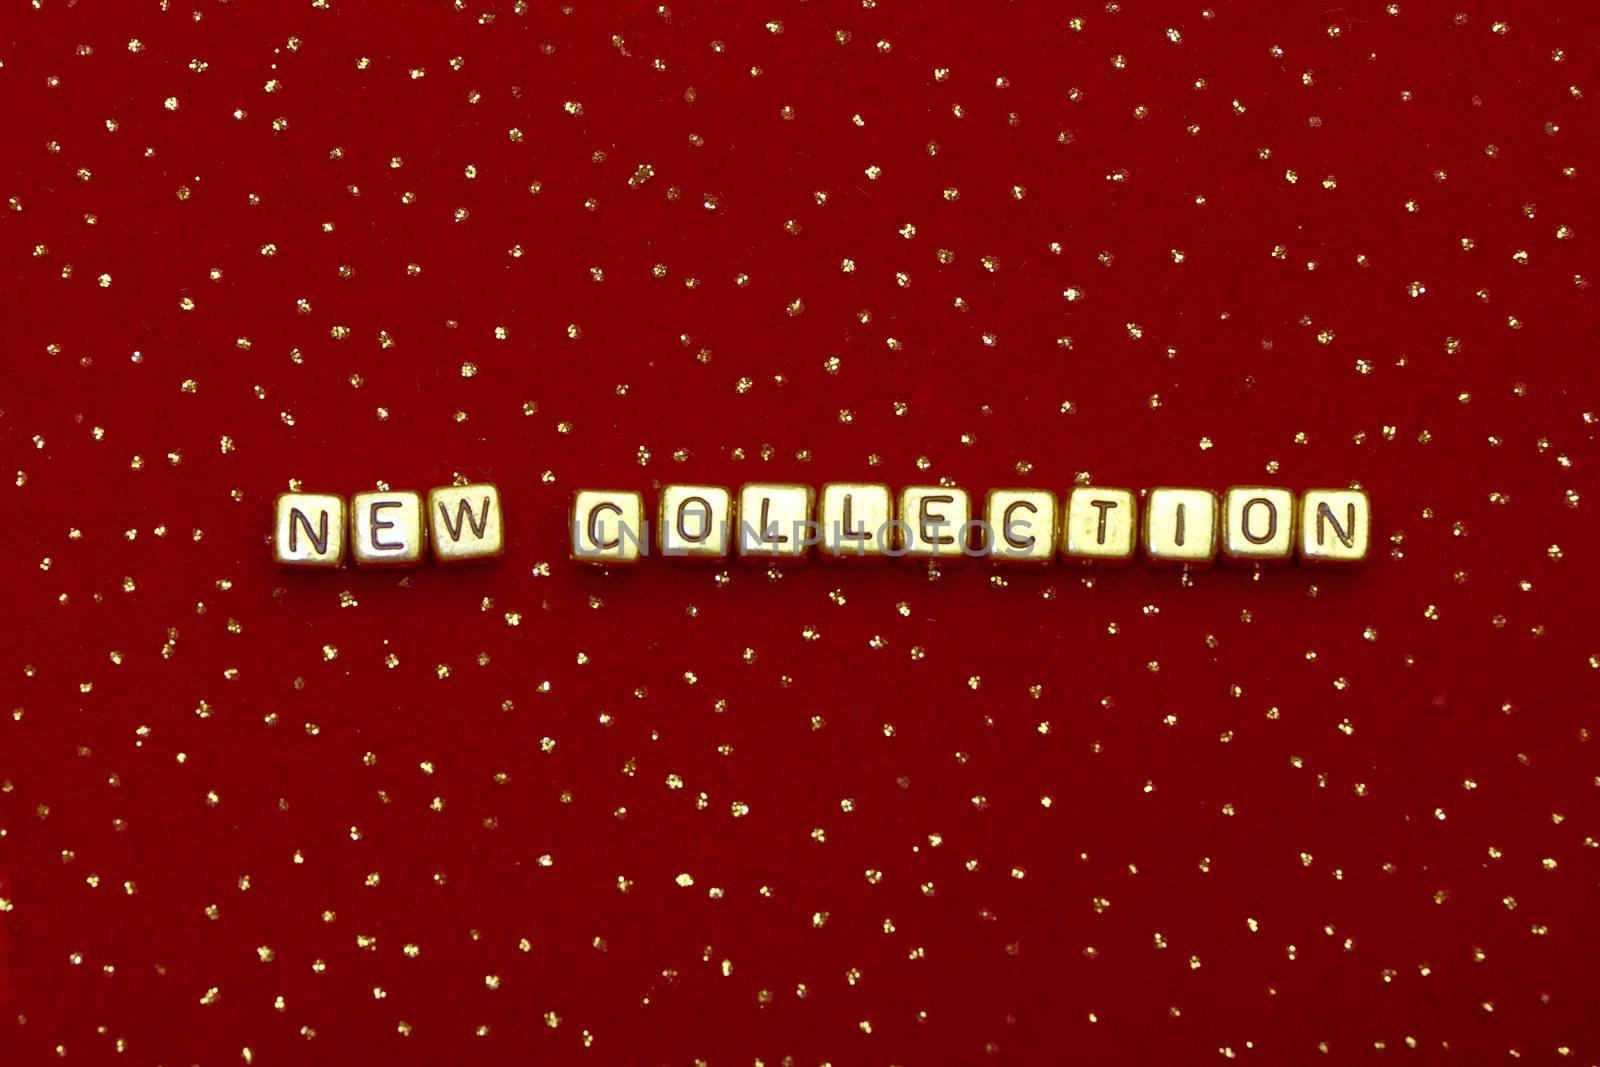 photo of words "new collection" of beads on a red velvet with sequins